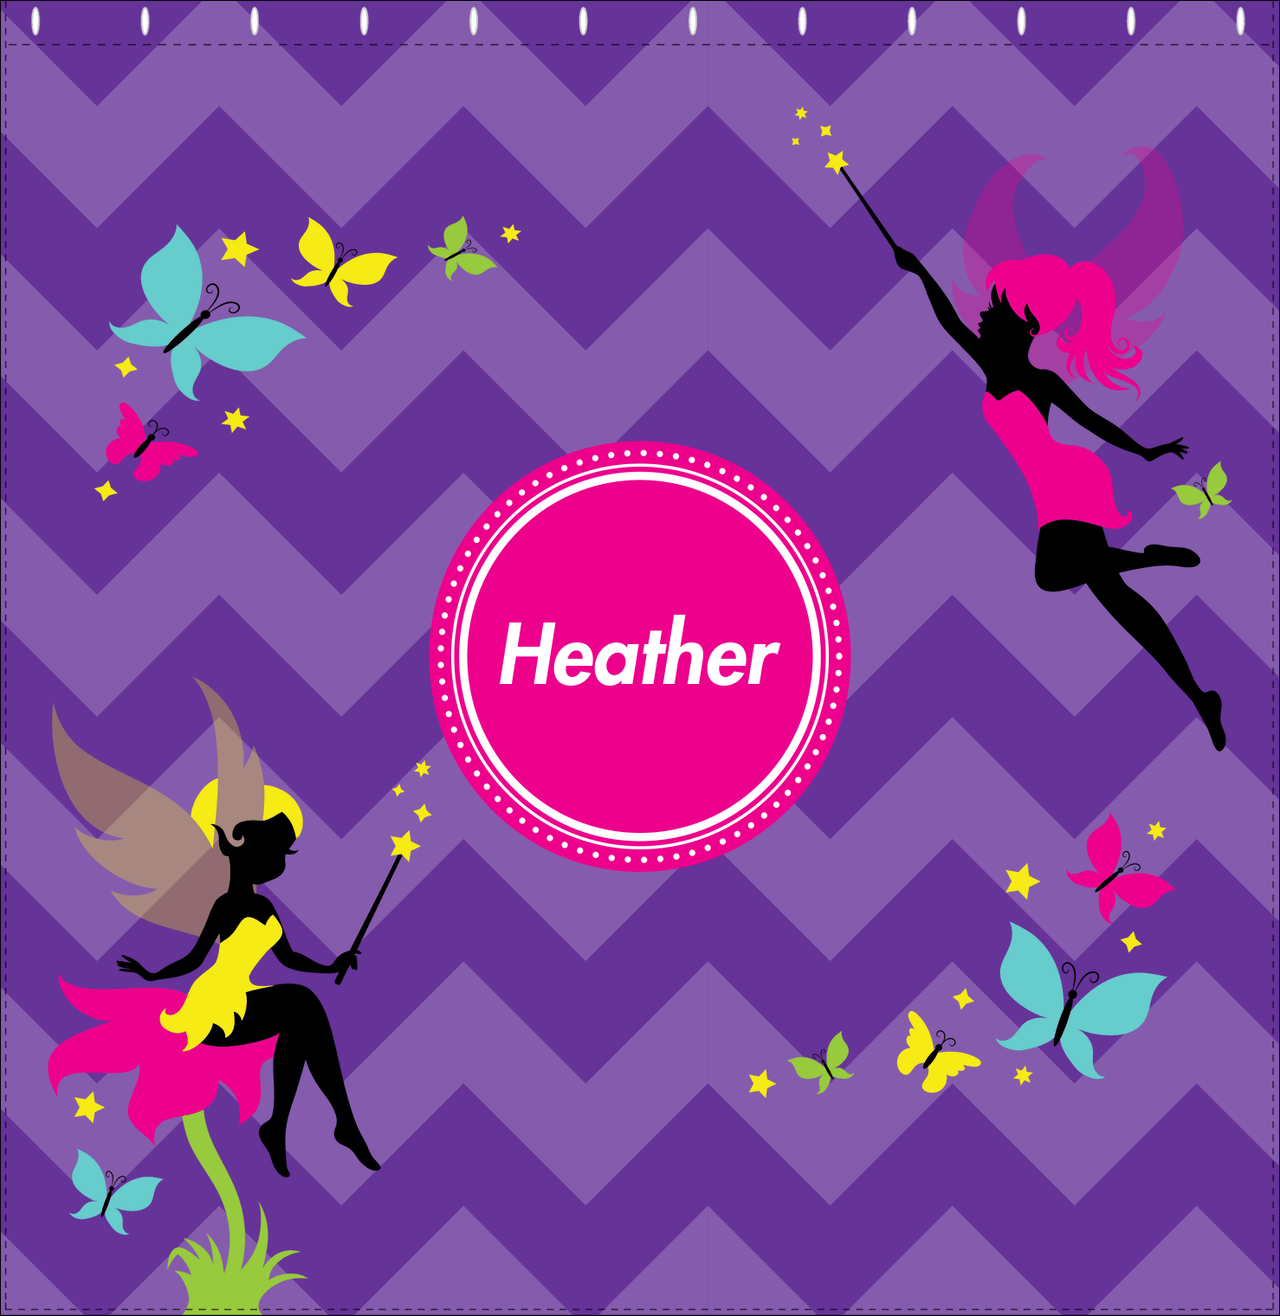 Personalized Fairy Shower Curtain IX - Purple Background with Chevron - Decorate View